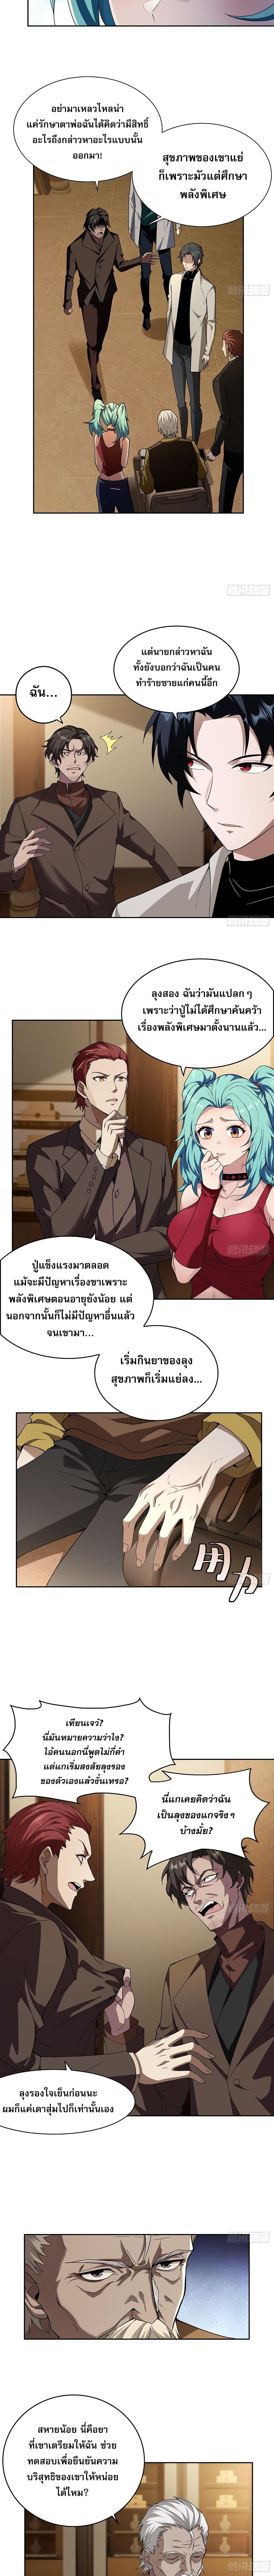 The All-Knowing Cultivator ผู้ฝึกตนผู้รอบรู้ 5/11